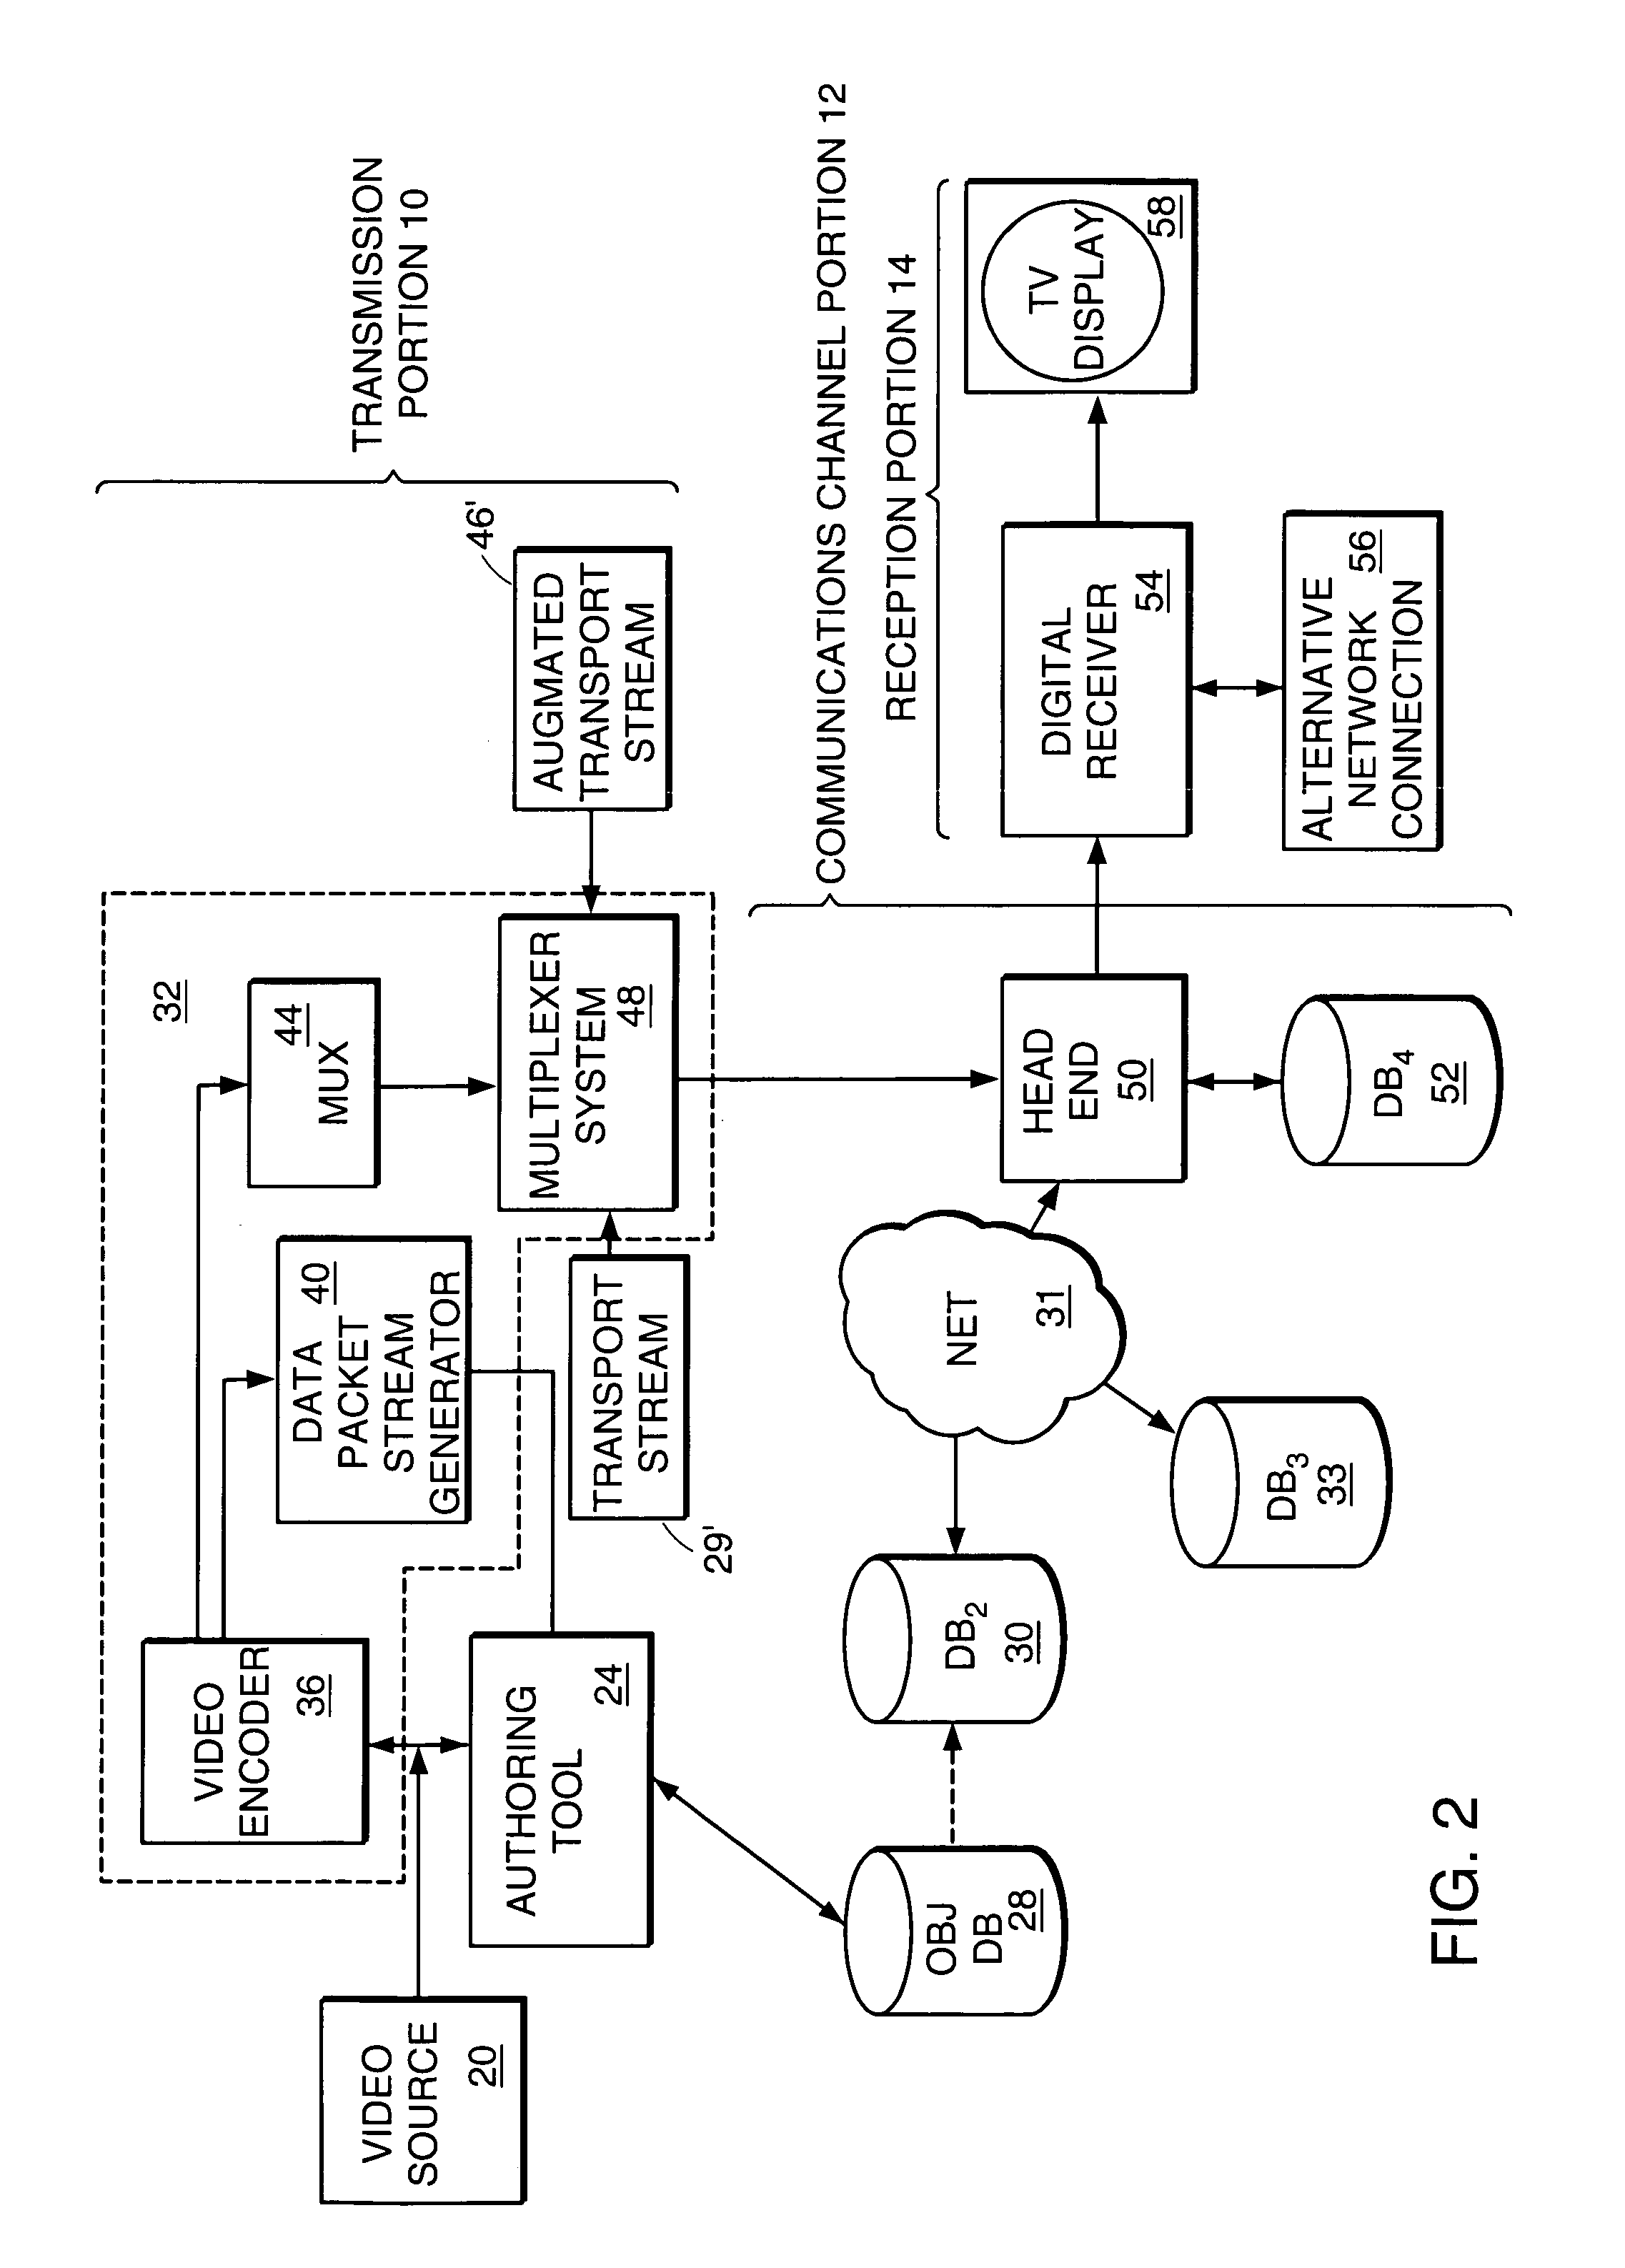 Method and apparatus for receiving a hyperlinked television broadcast